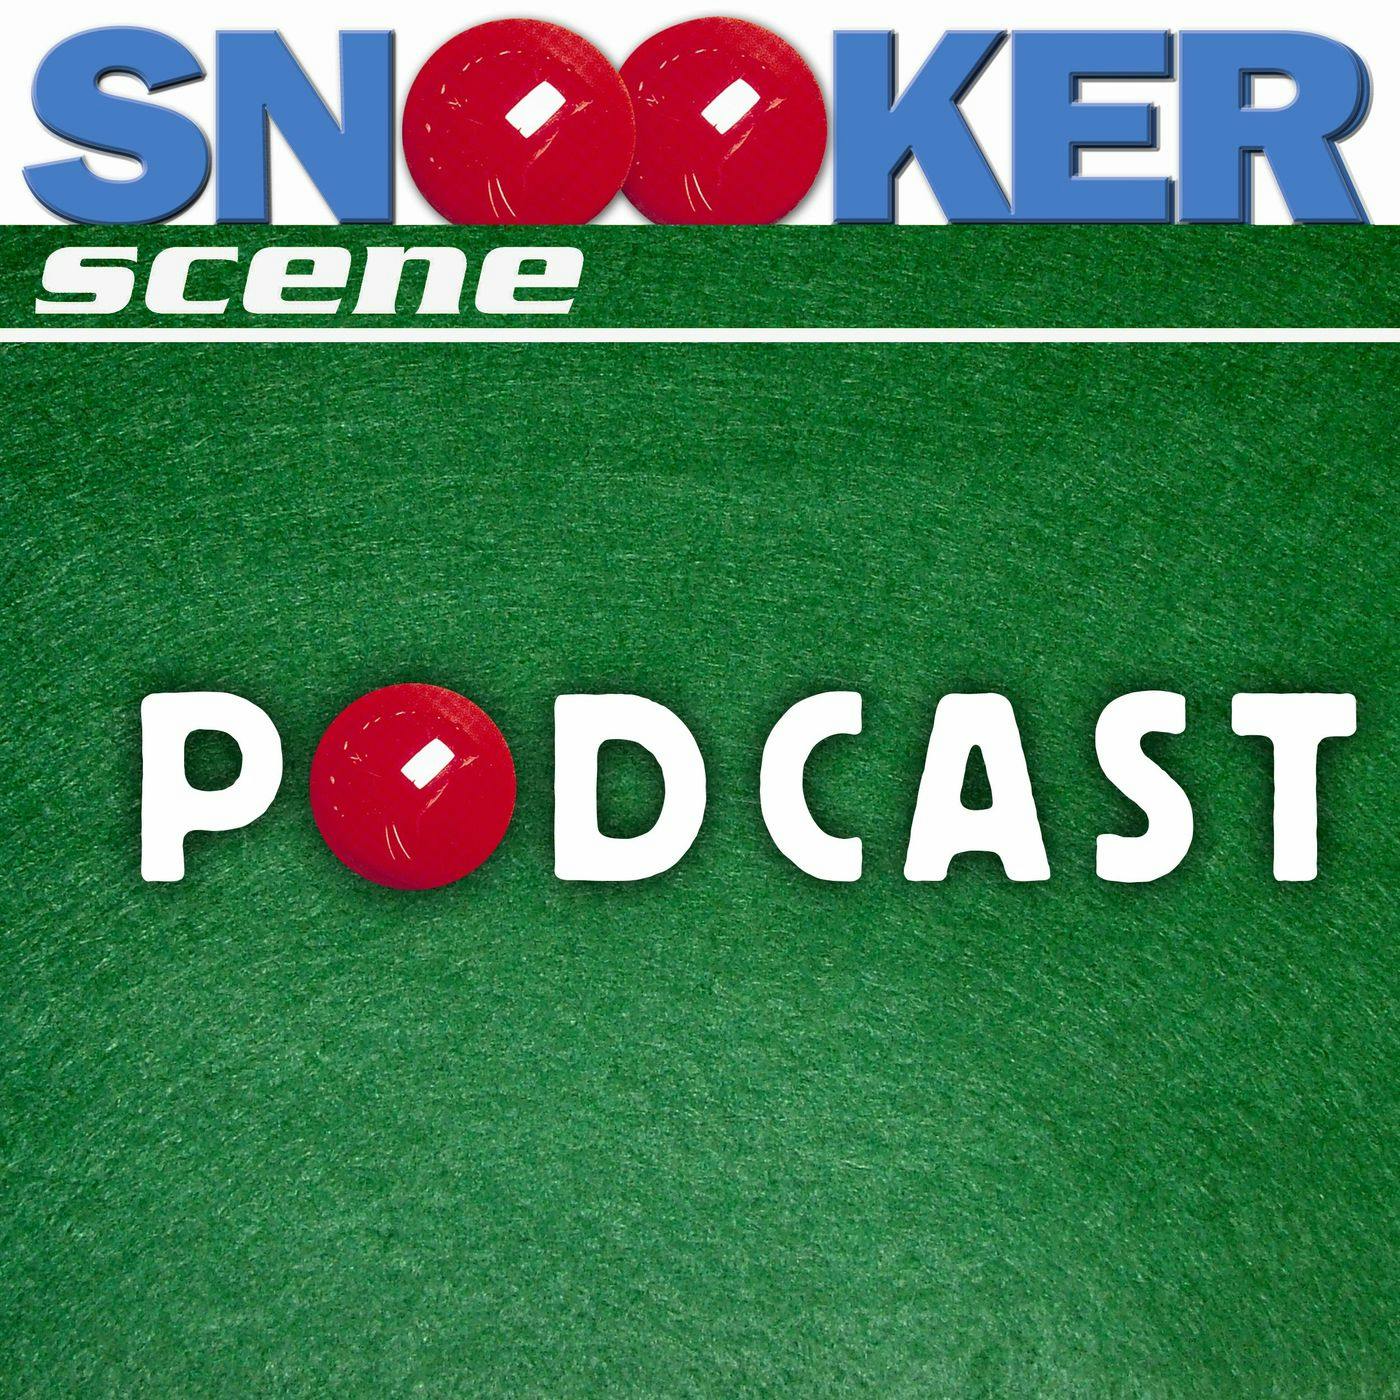 Snooker Scene Podcast episode 157 - Review of the Season